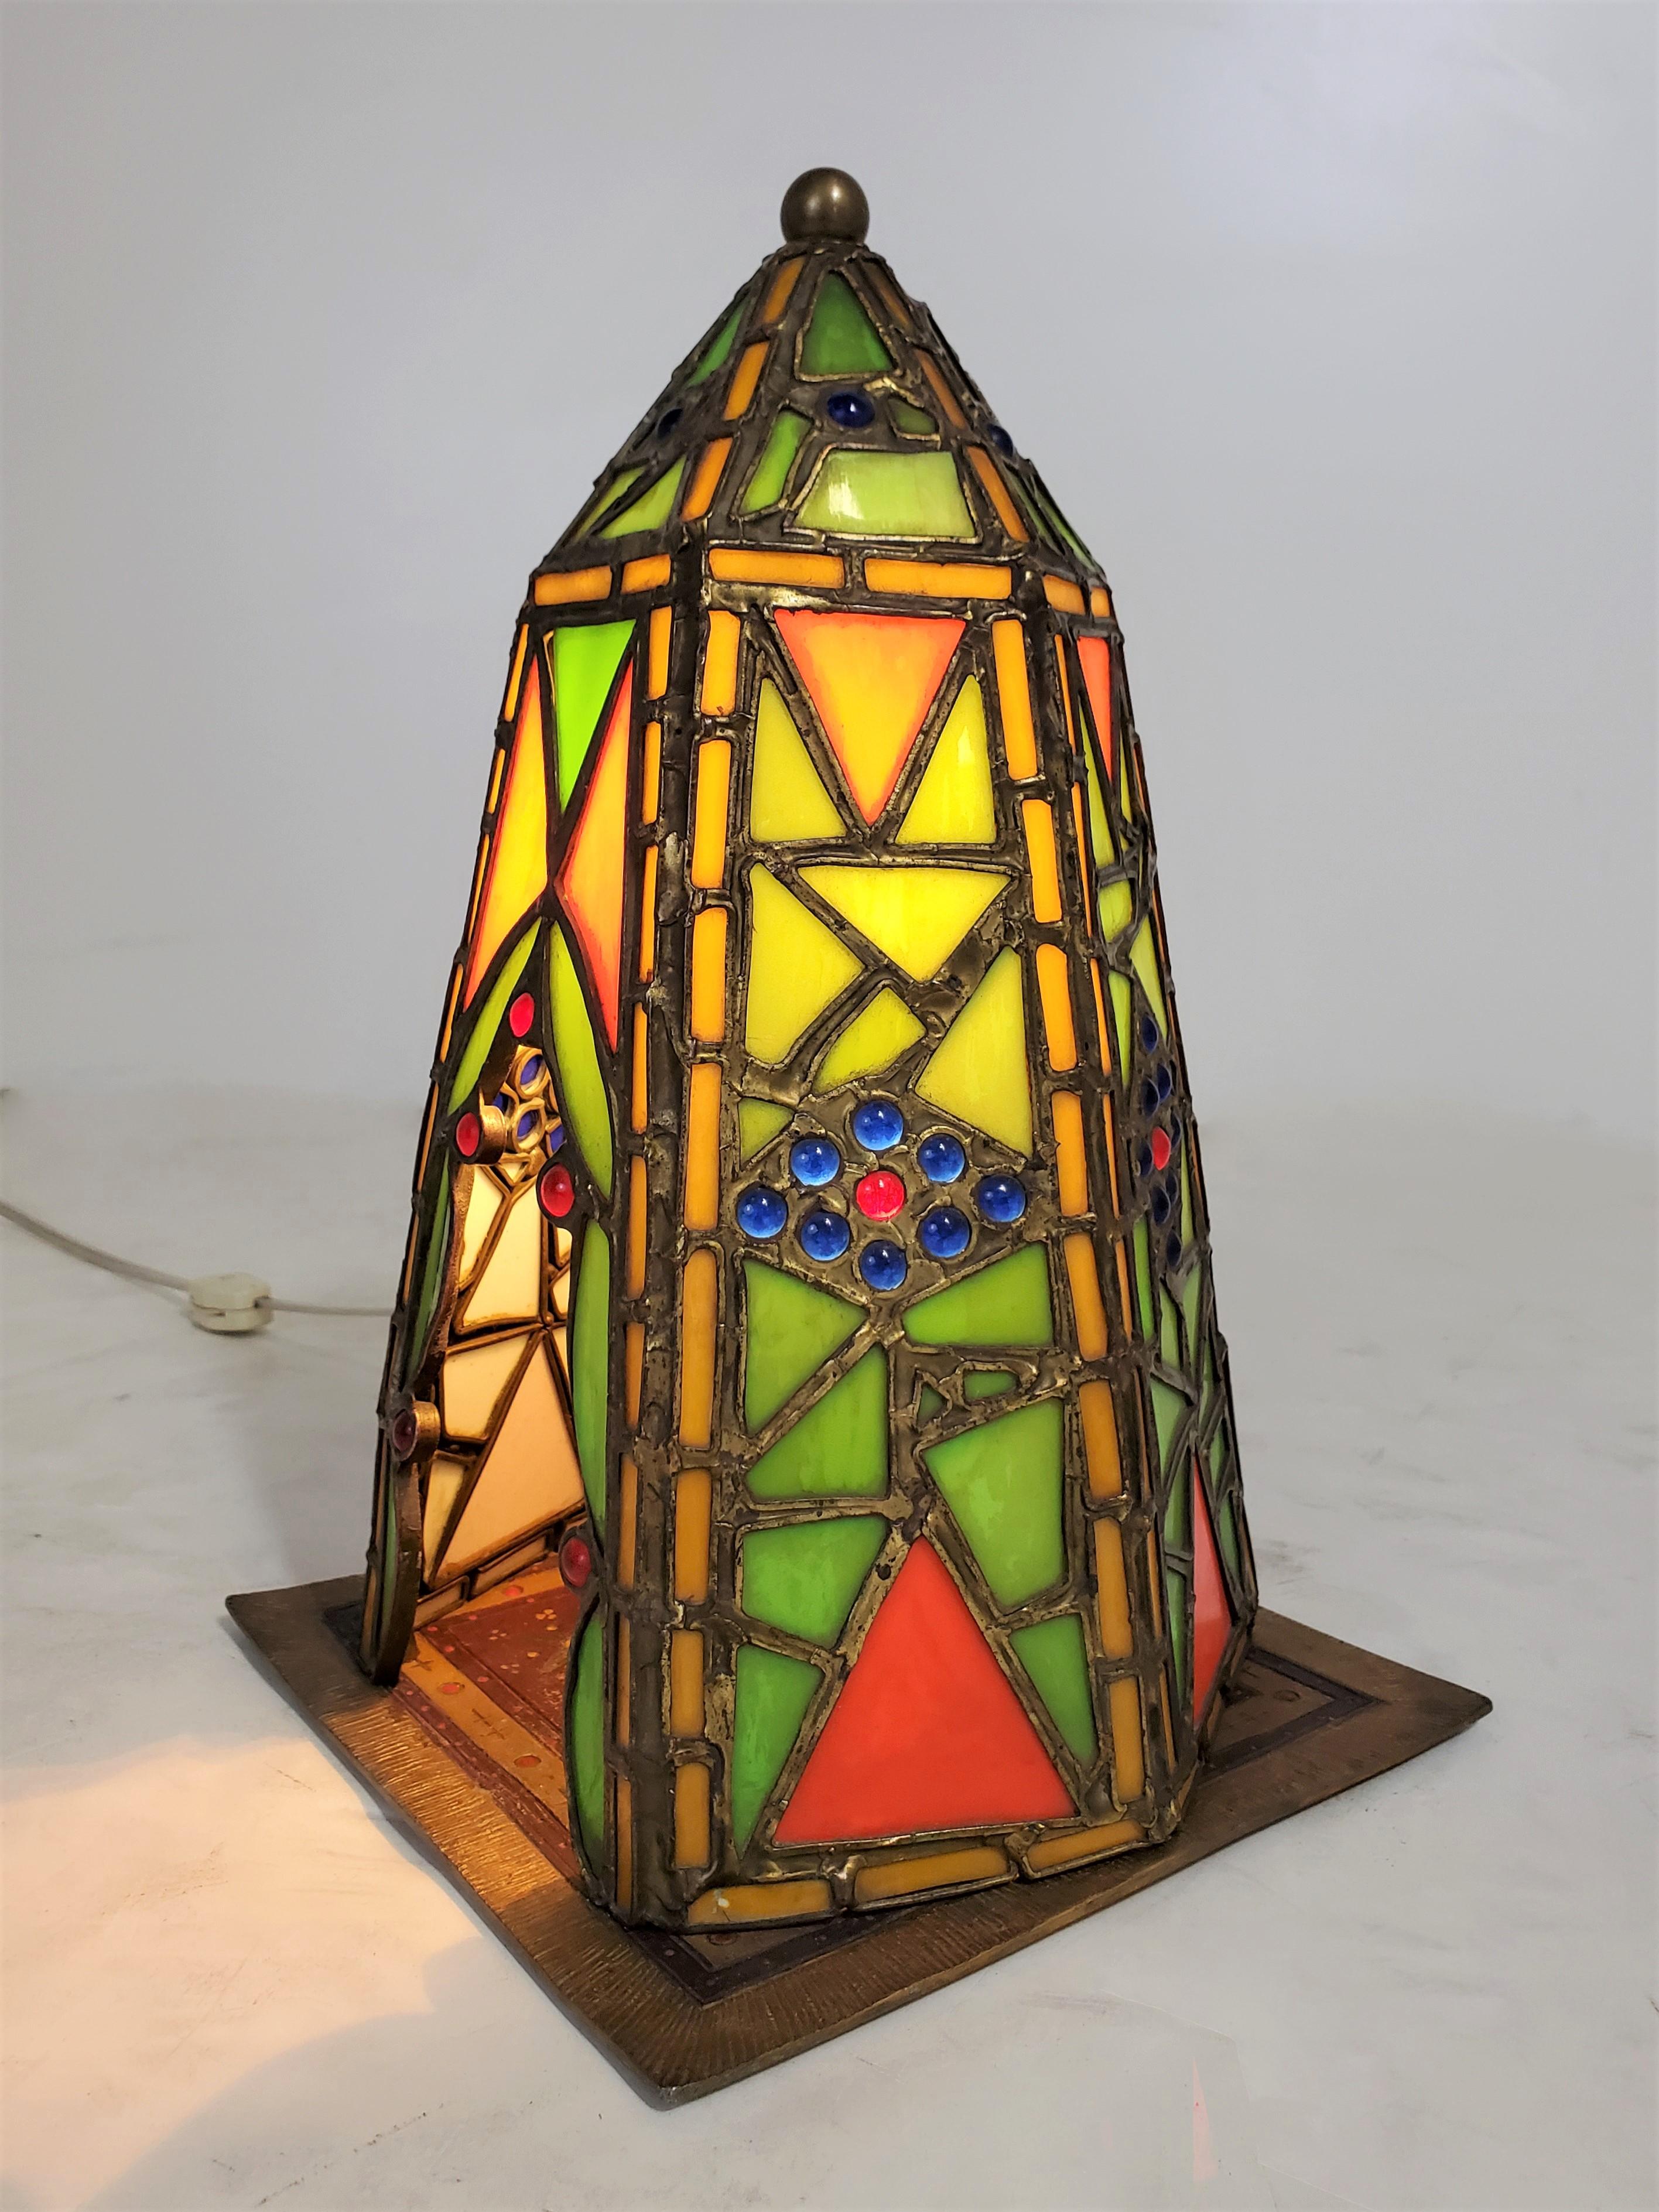 A charming Middle Eastern theme decorative table lamp / night light in leaded glass and cold painted French metal. Highly atmospheric with a soft glow and deep rich colors, the mosaic like tent illuminates to display a musician playing a mandolin